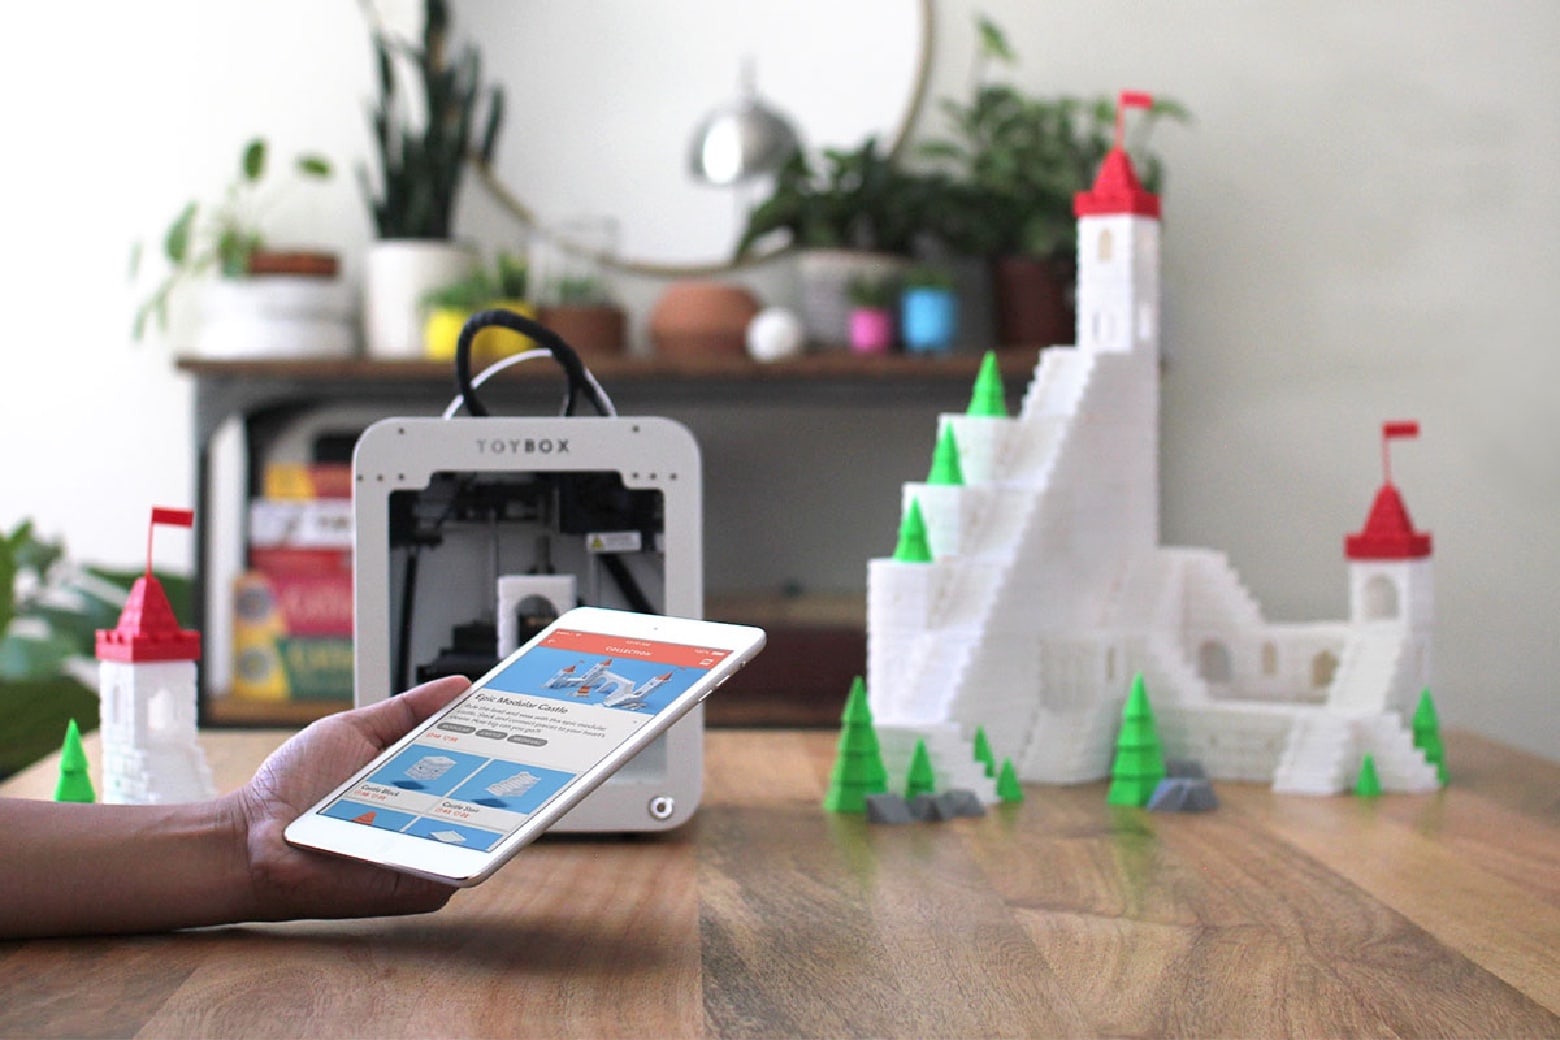 Toybox kid-friendly 3D printer cranks out tons of toys